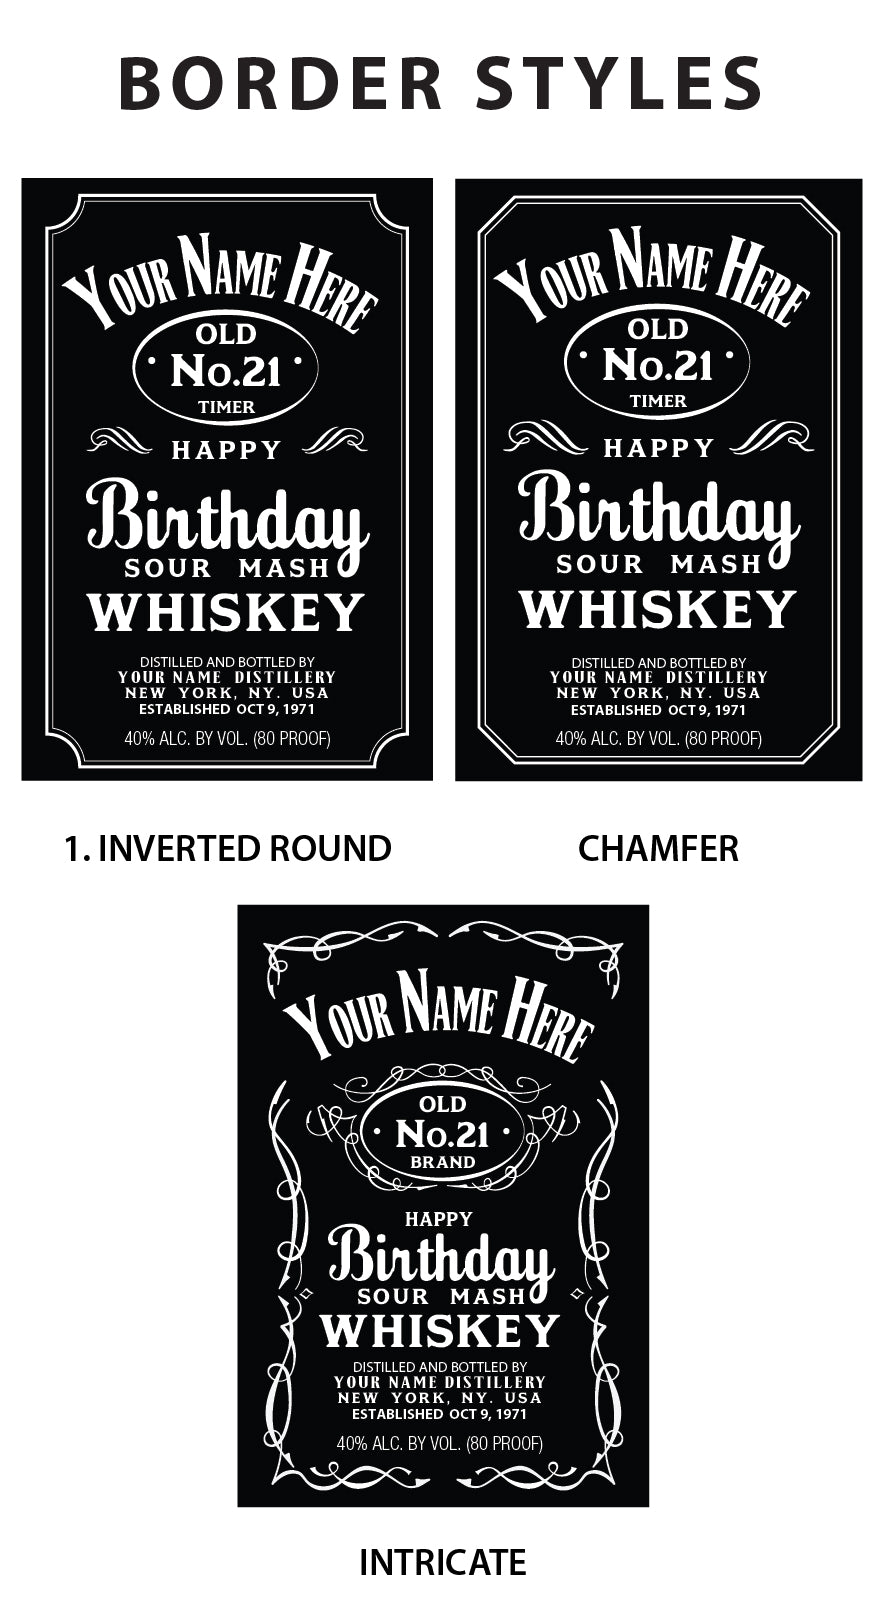 Personalized Label to fit Jack Daniel's Bottles